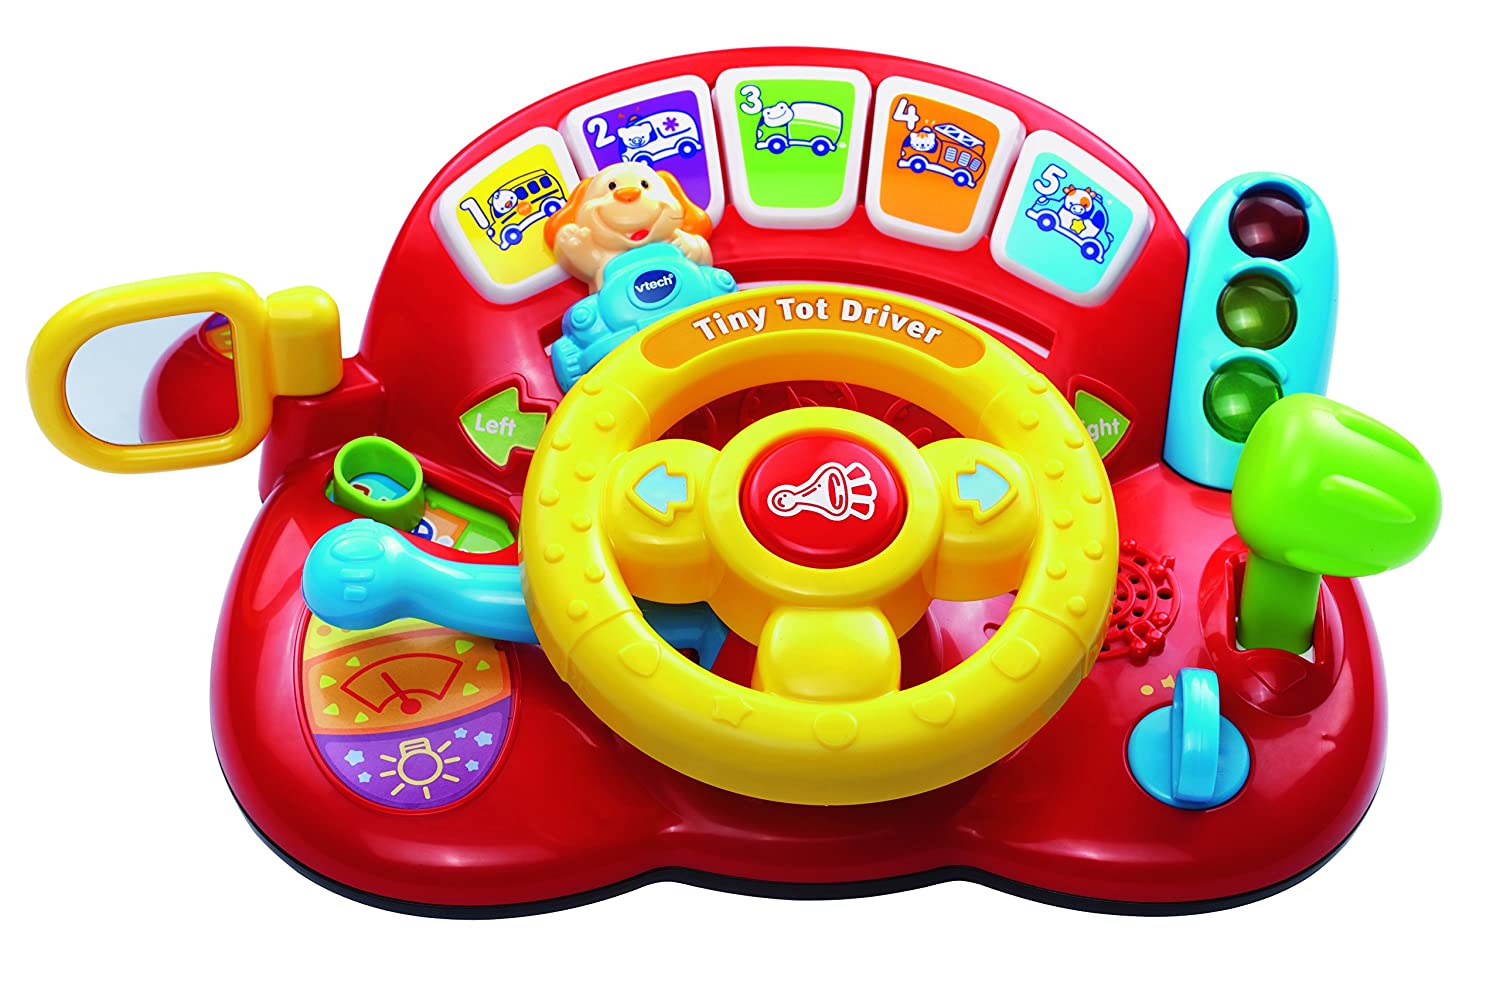 Jucarie interactiva Vtech, micul sofer image0